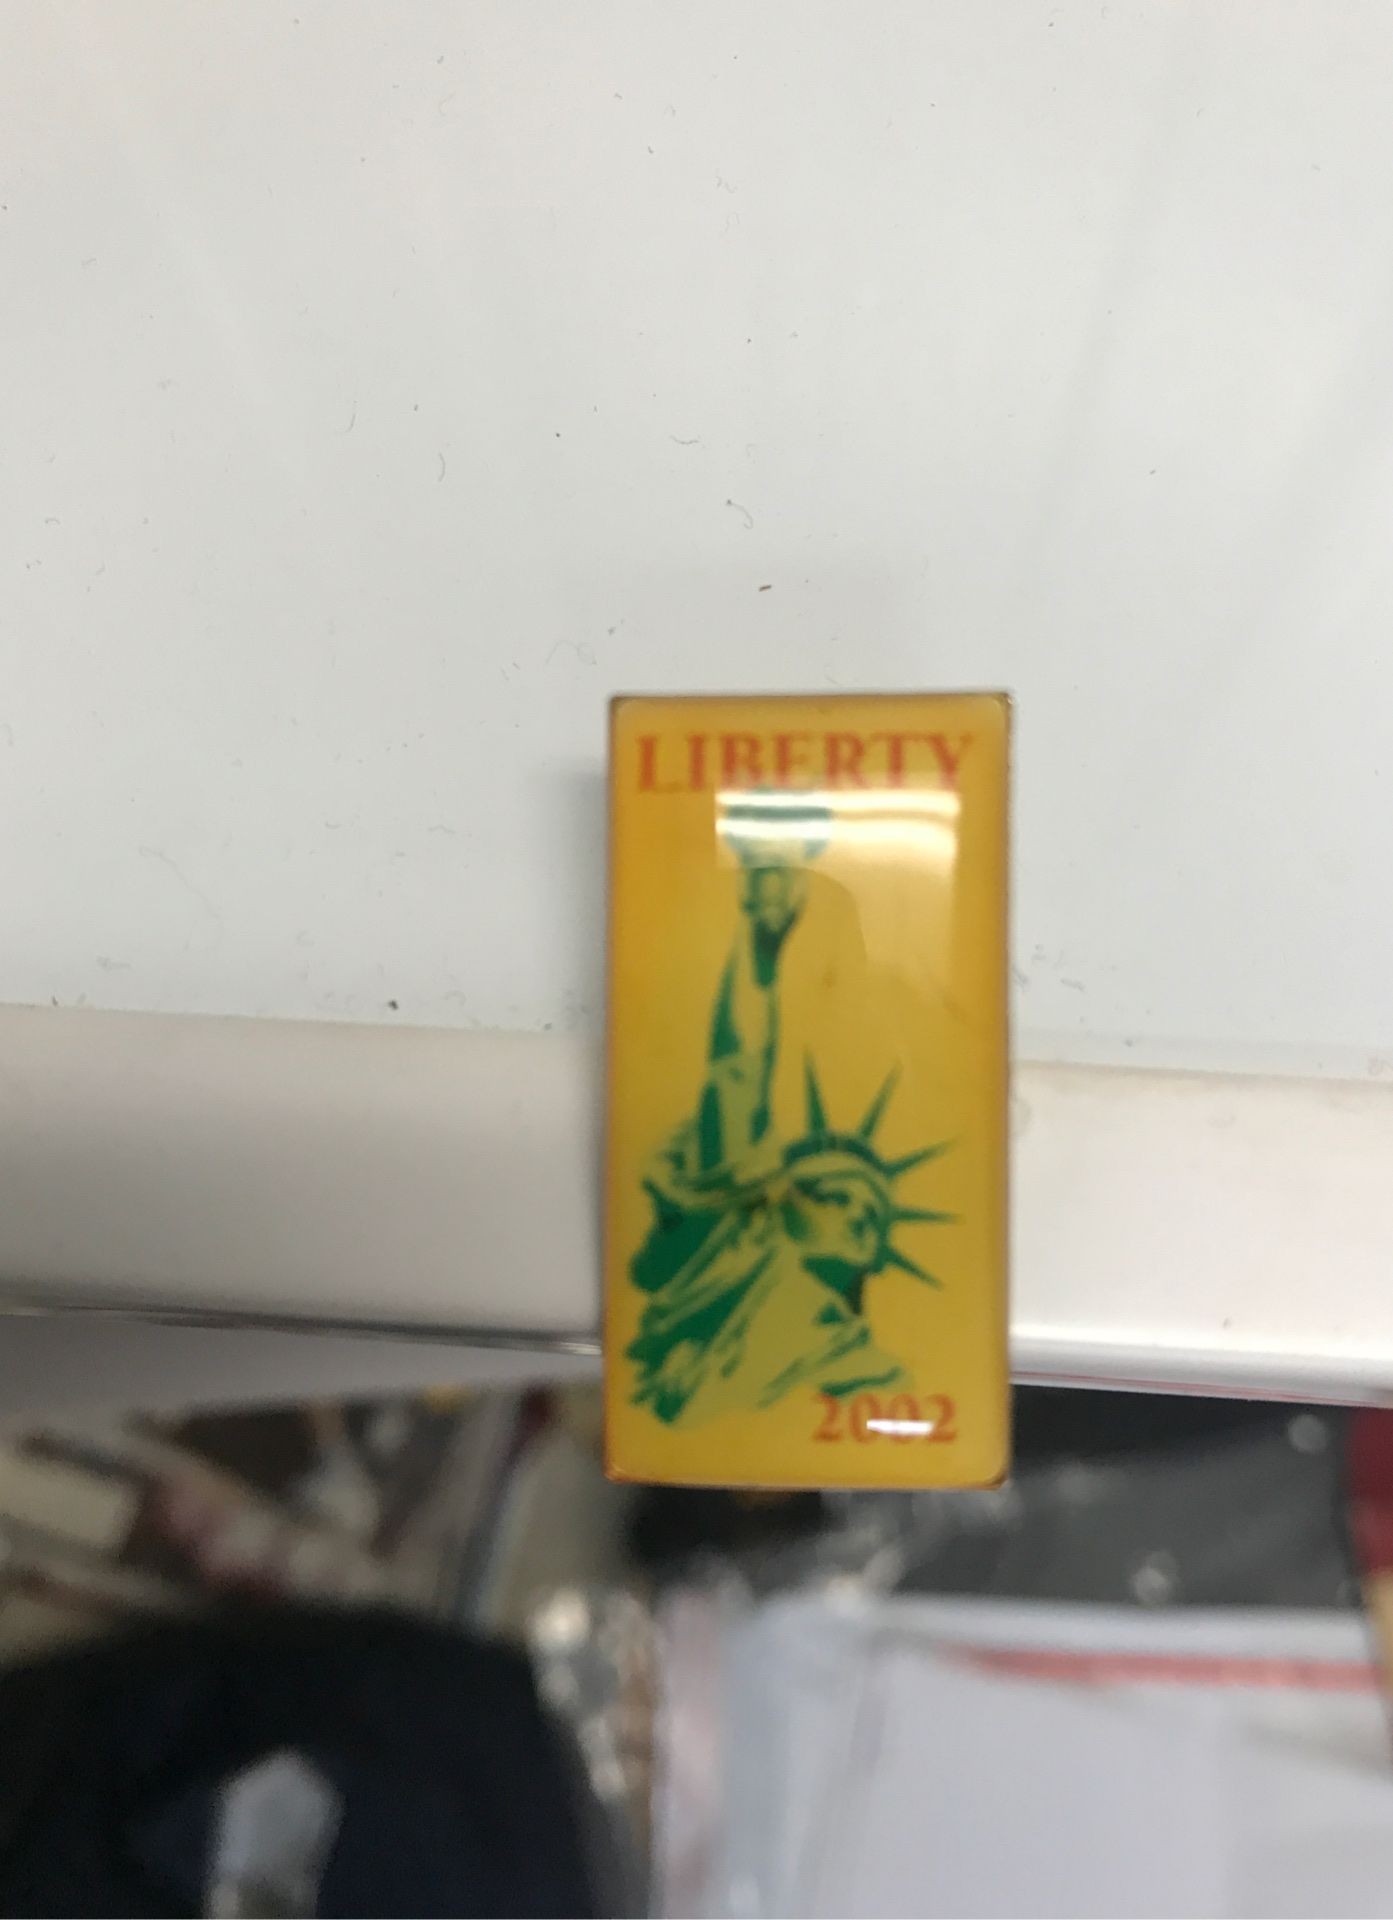 Liberty Pin from 2002